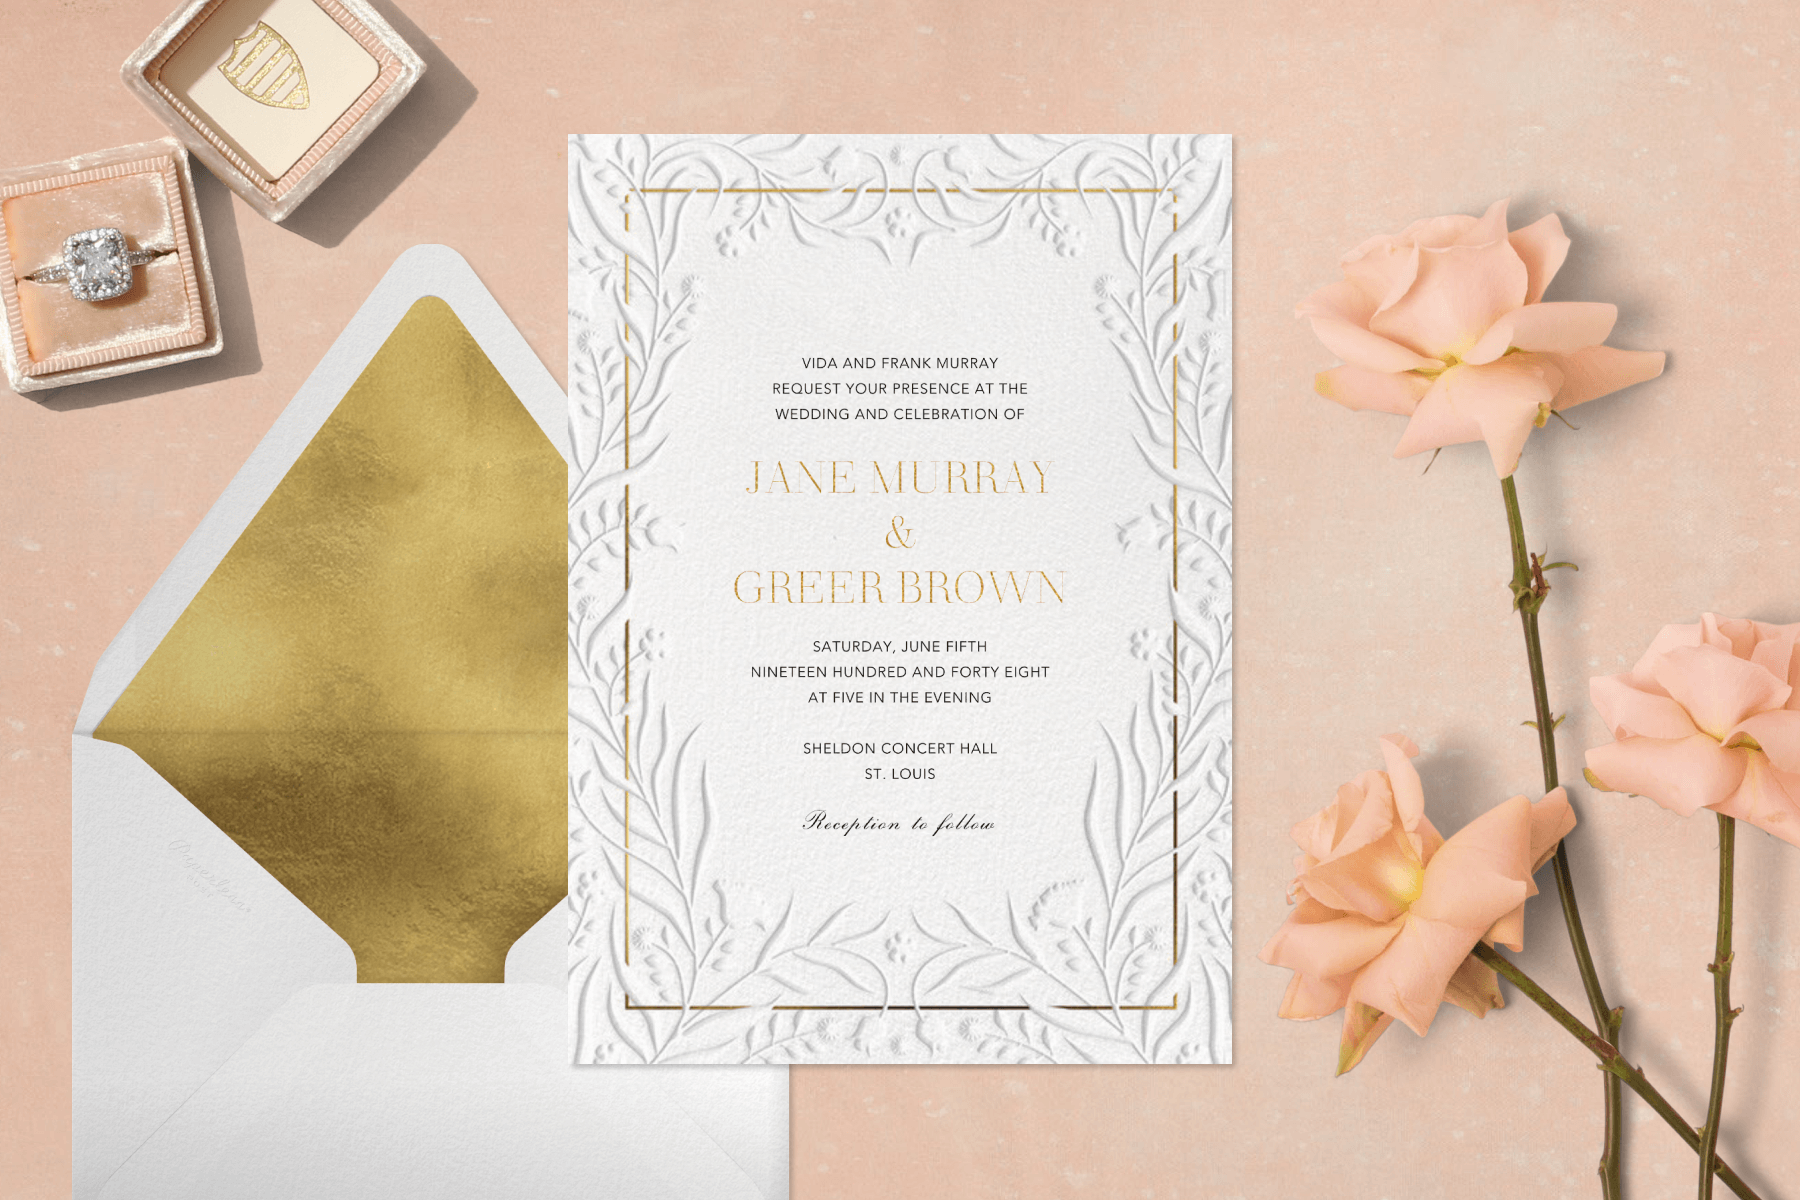 A vertical white wedding invitation with floral embossing and a gold border, surrounded by pink roses and an engagement ring on a pink background.